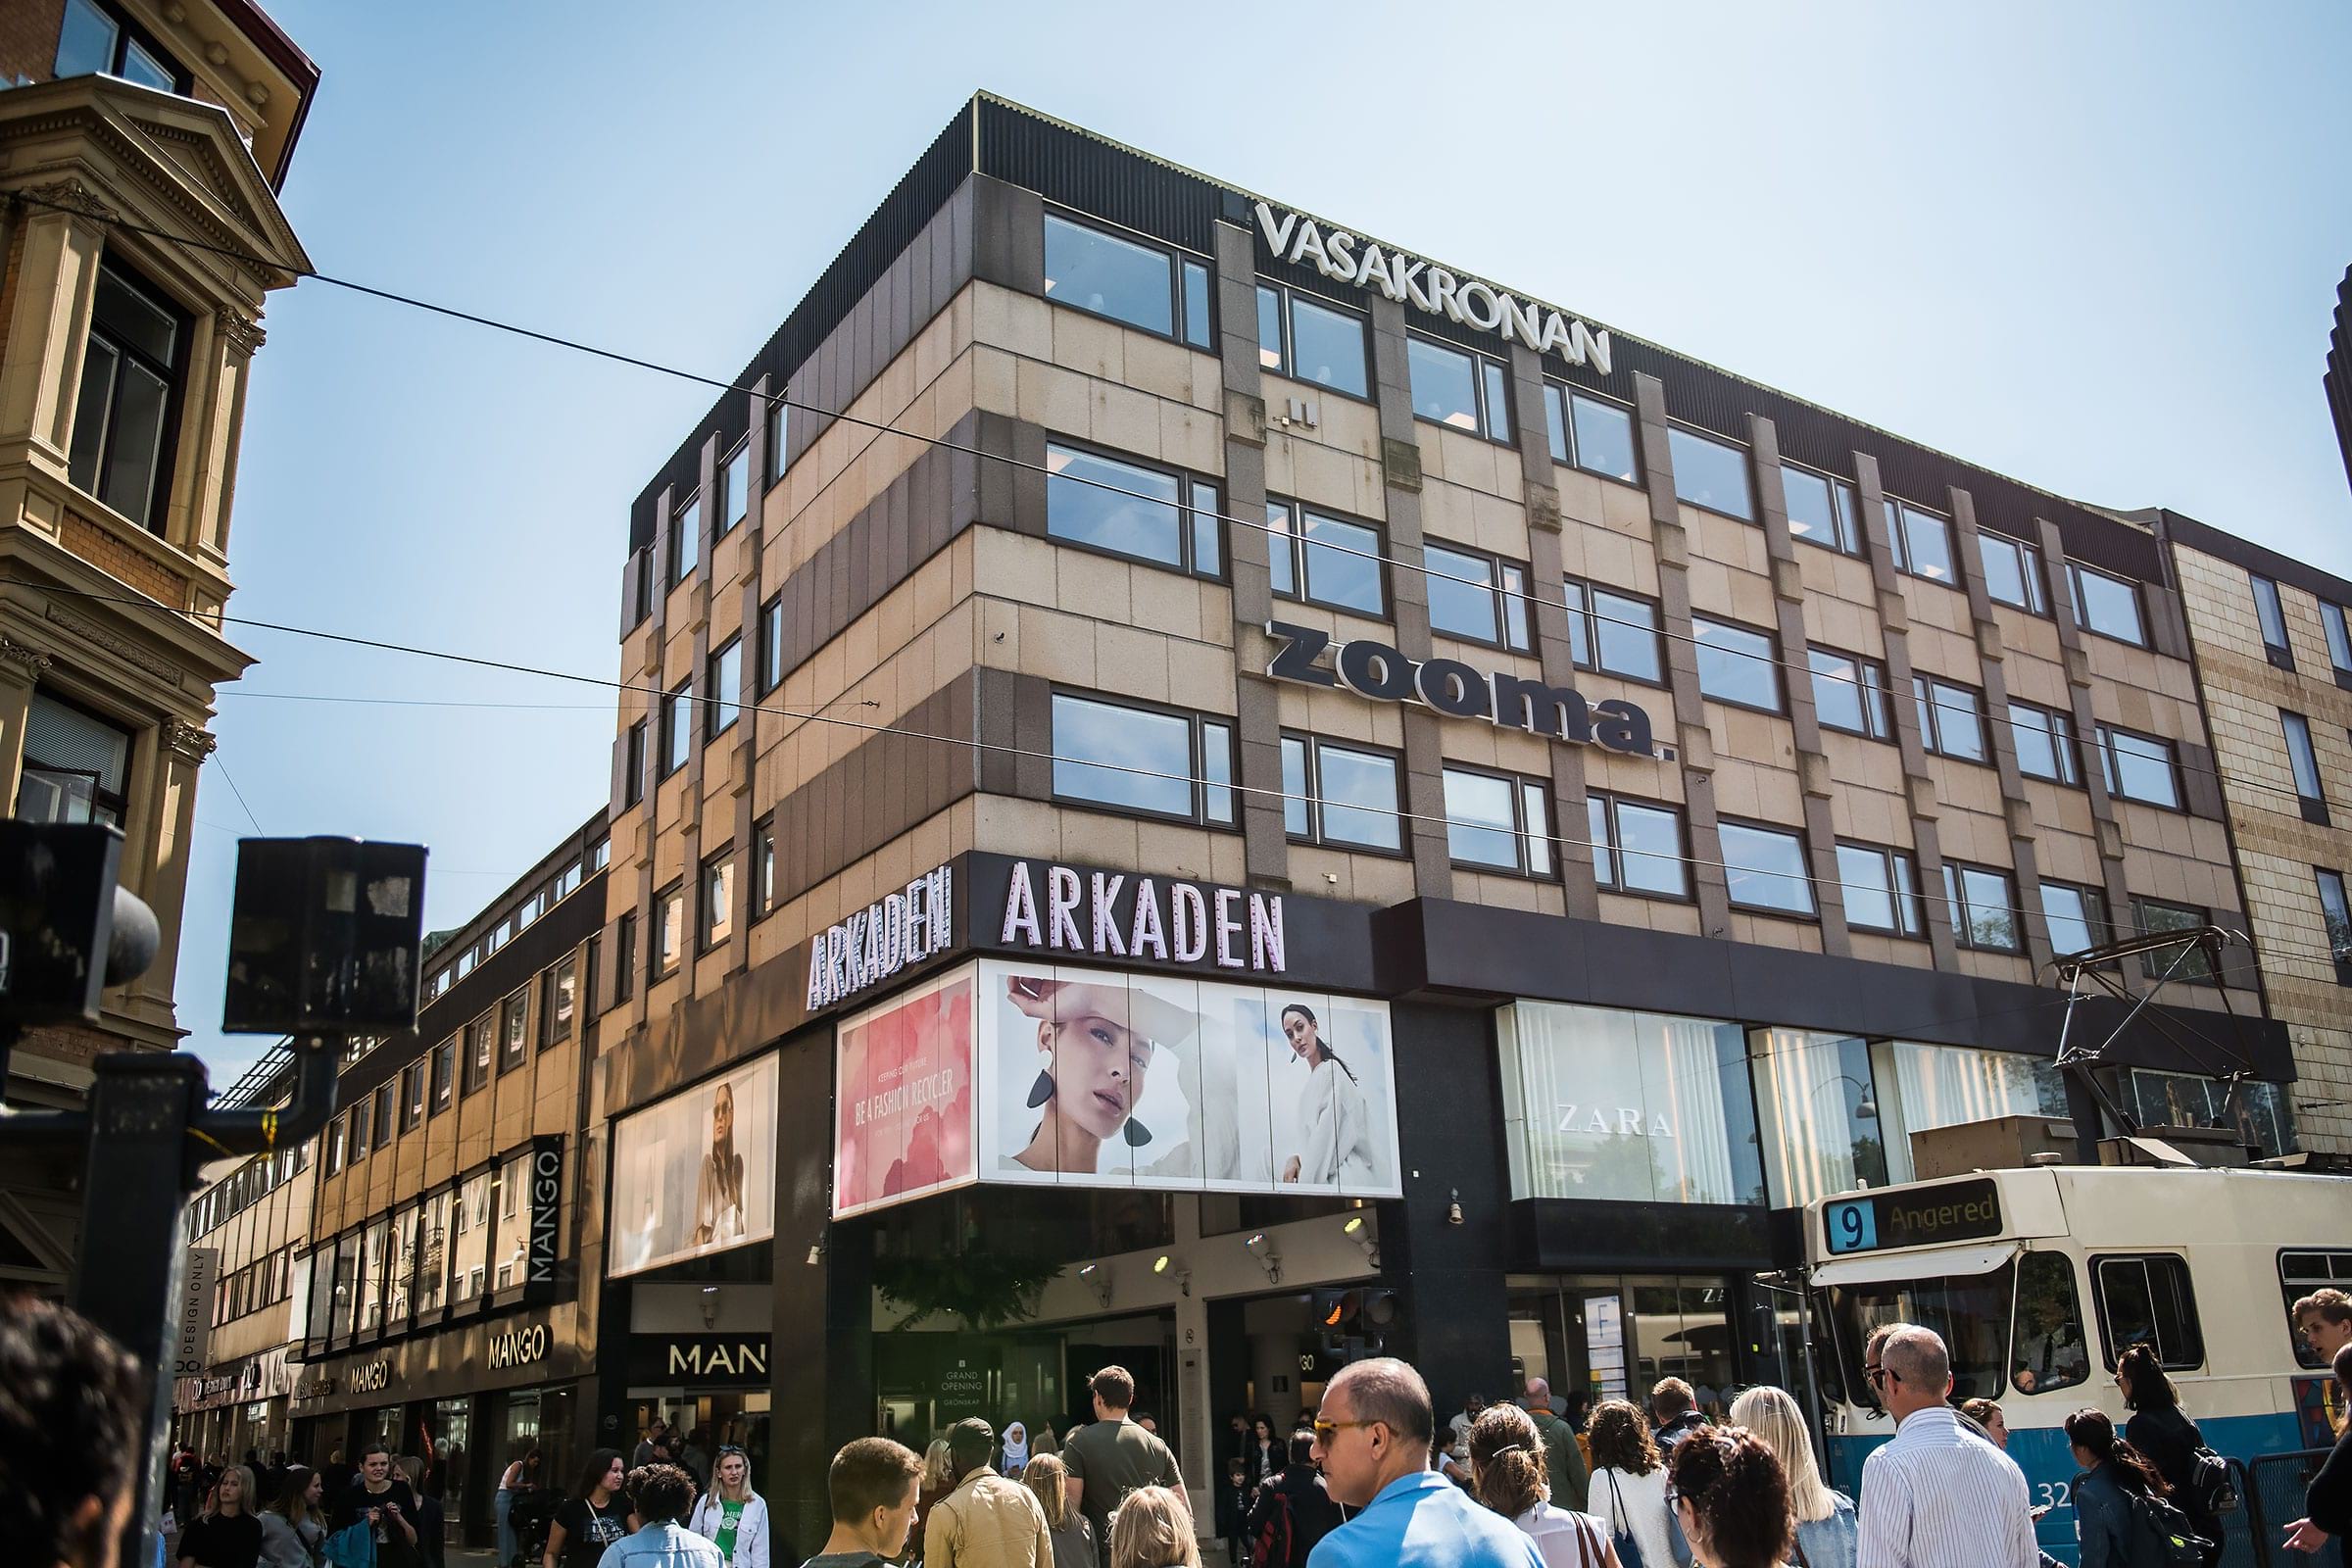 A weekend in Gothenburg: experience the city in 48 hours